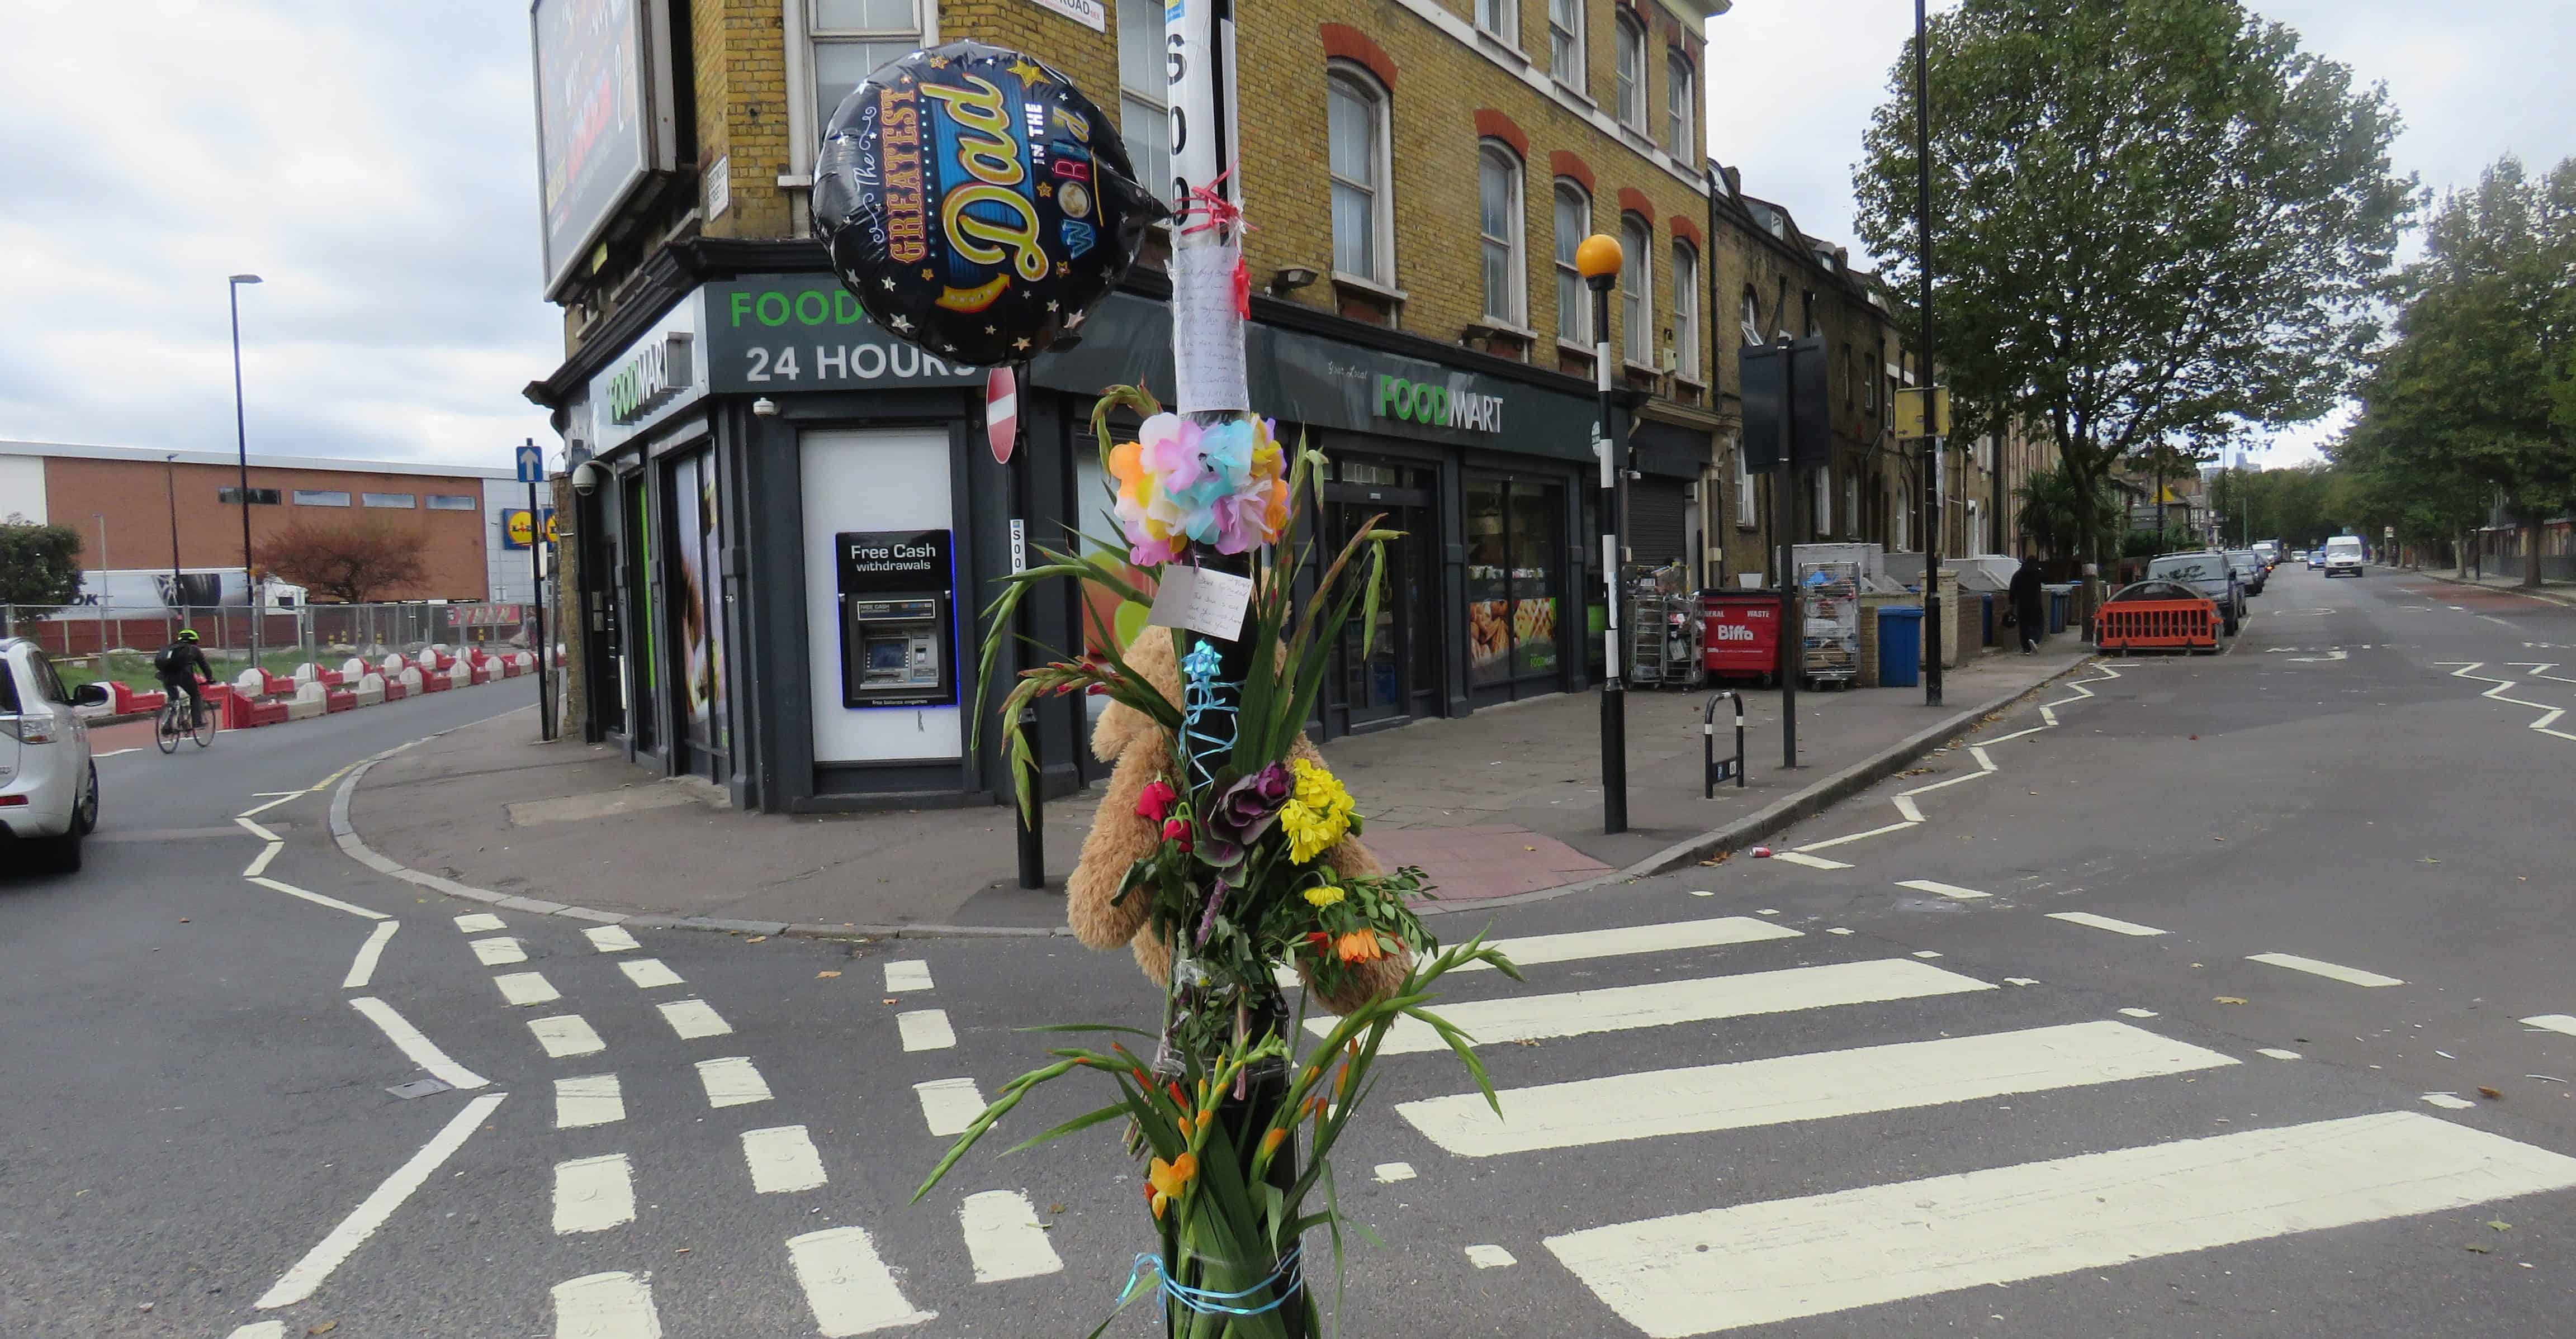 Tributes were left to Mr Harris at the scene where he was killed in a collision with a Mercedes Benz